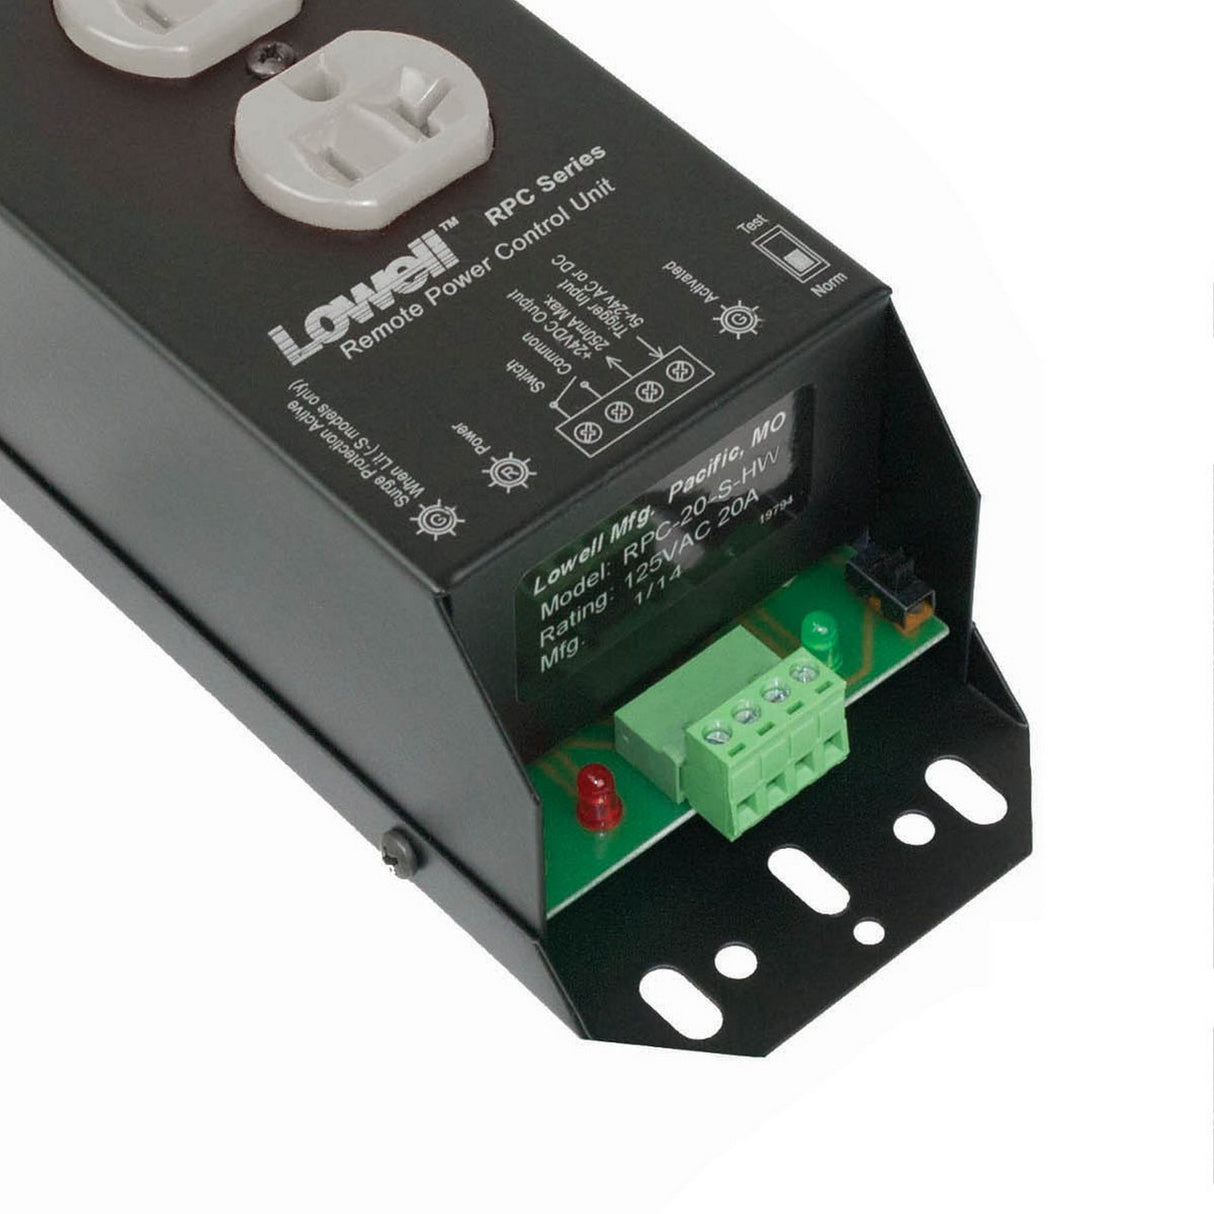 Lowell RPC-20-SHW 20A Remote Power Control